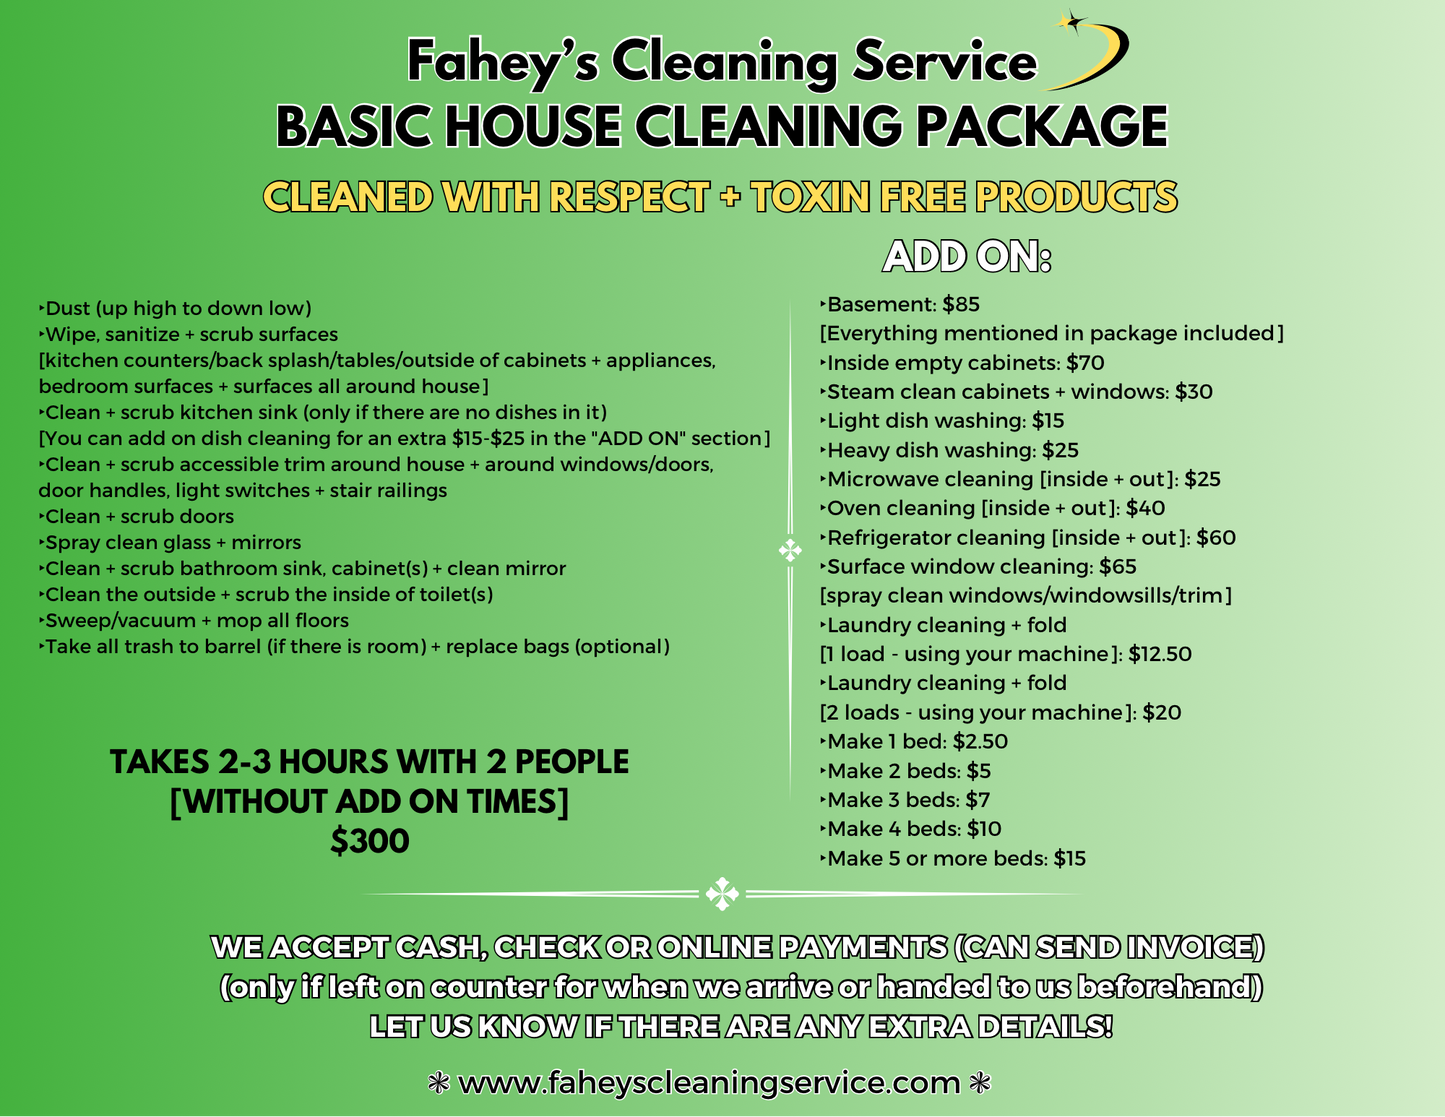 BASIC HOUSE CLEANING PACKAGE